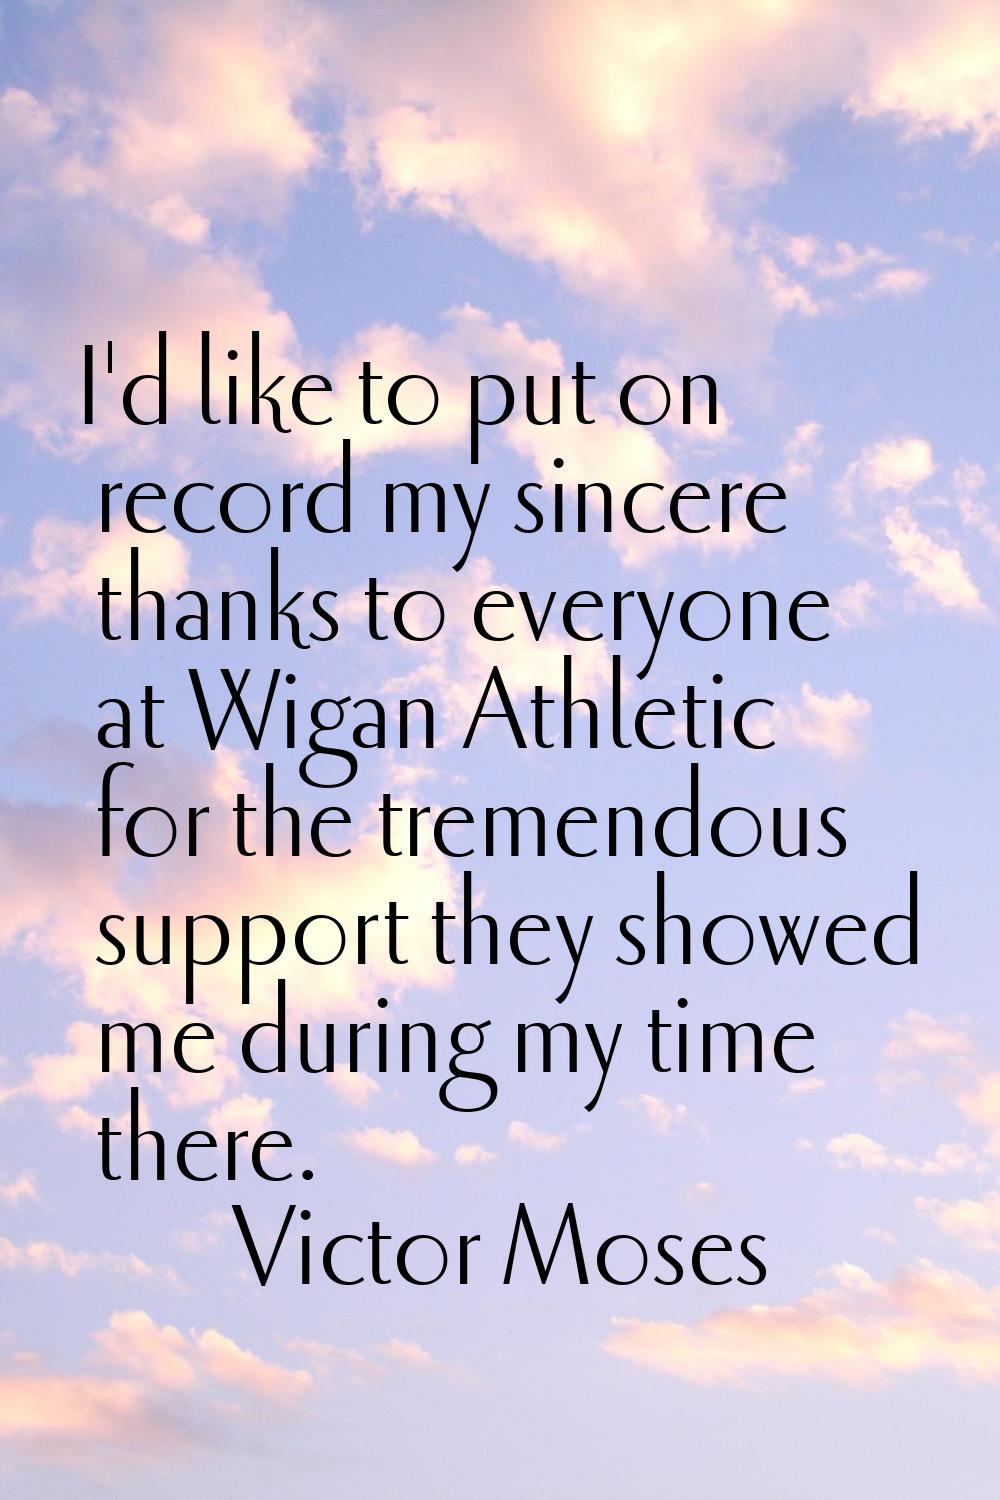 I'd like to put on record my sincere thanks to everyone at Wigan Athletic for the tremendous suppor